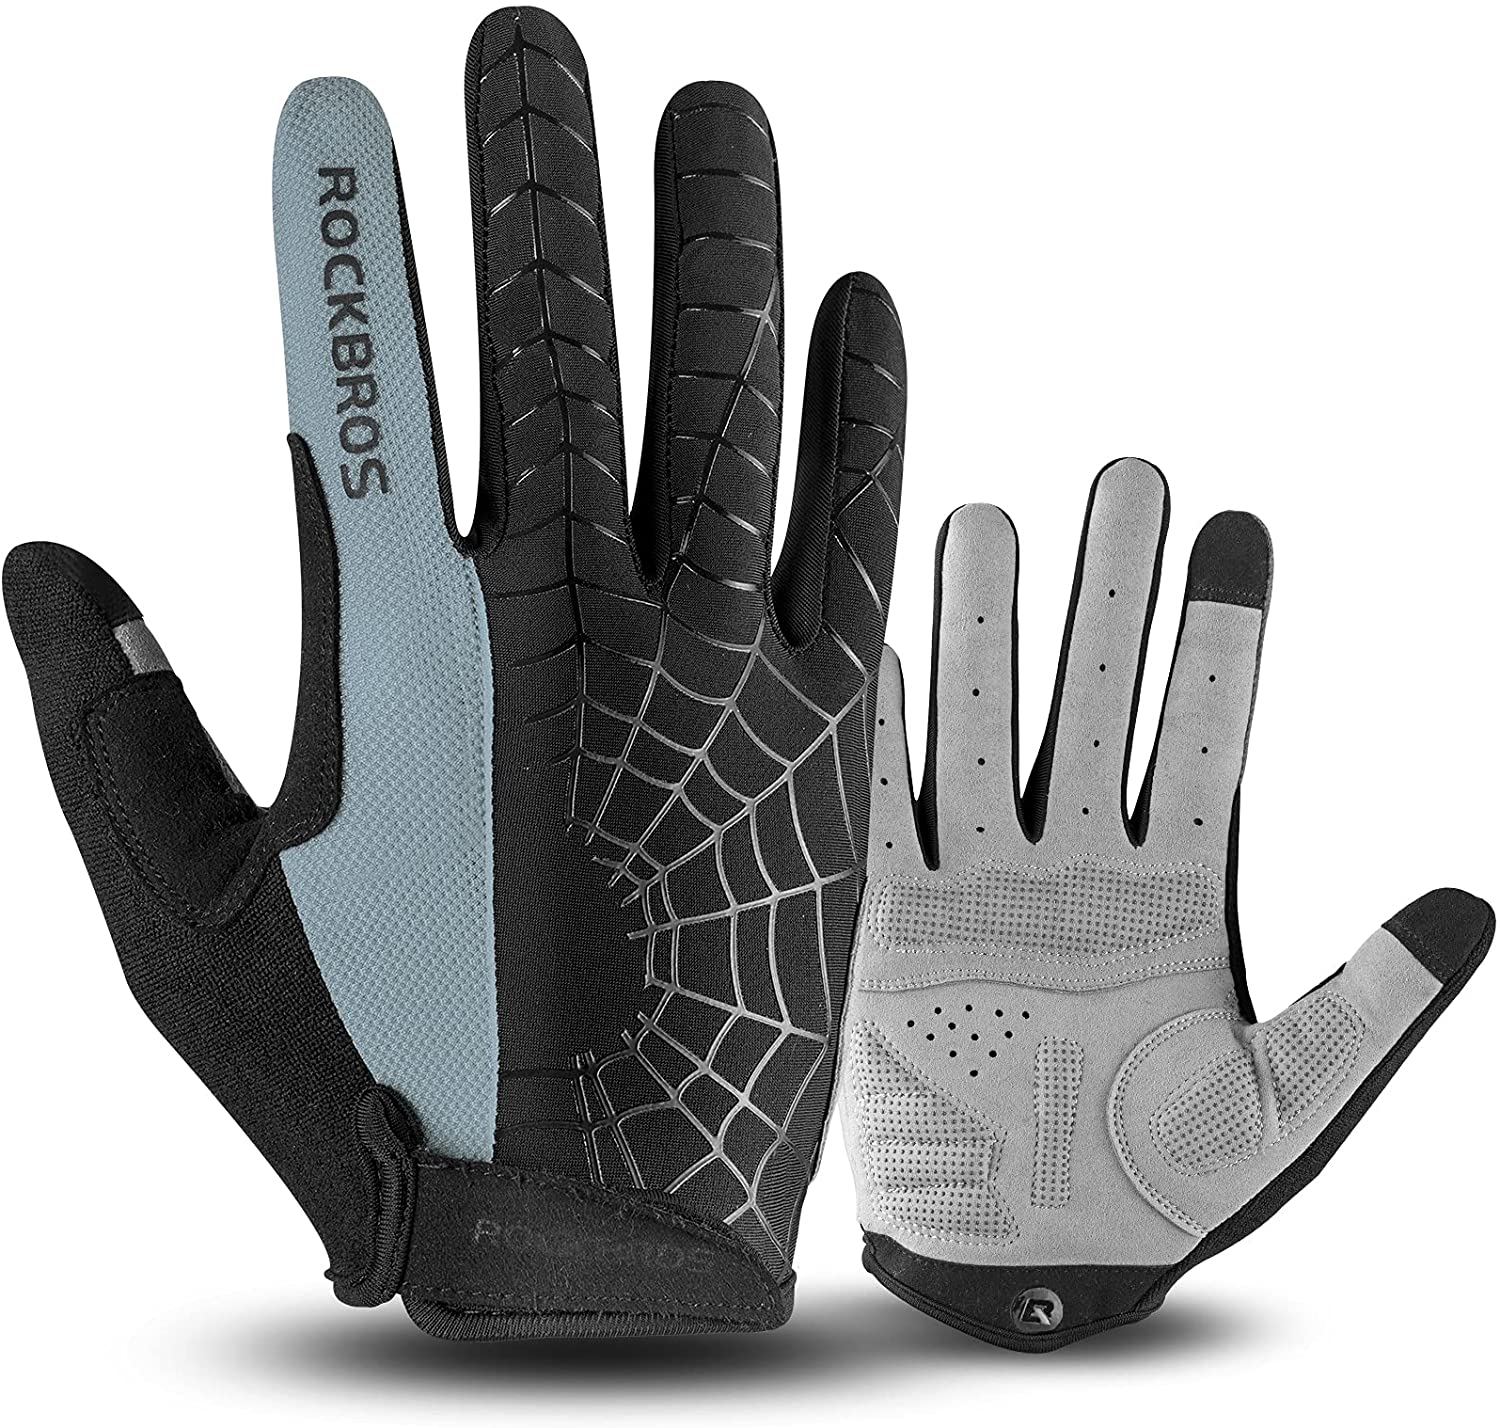 ROCKBROS Windproof Touch Screen Riding MTB Bike Gloves